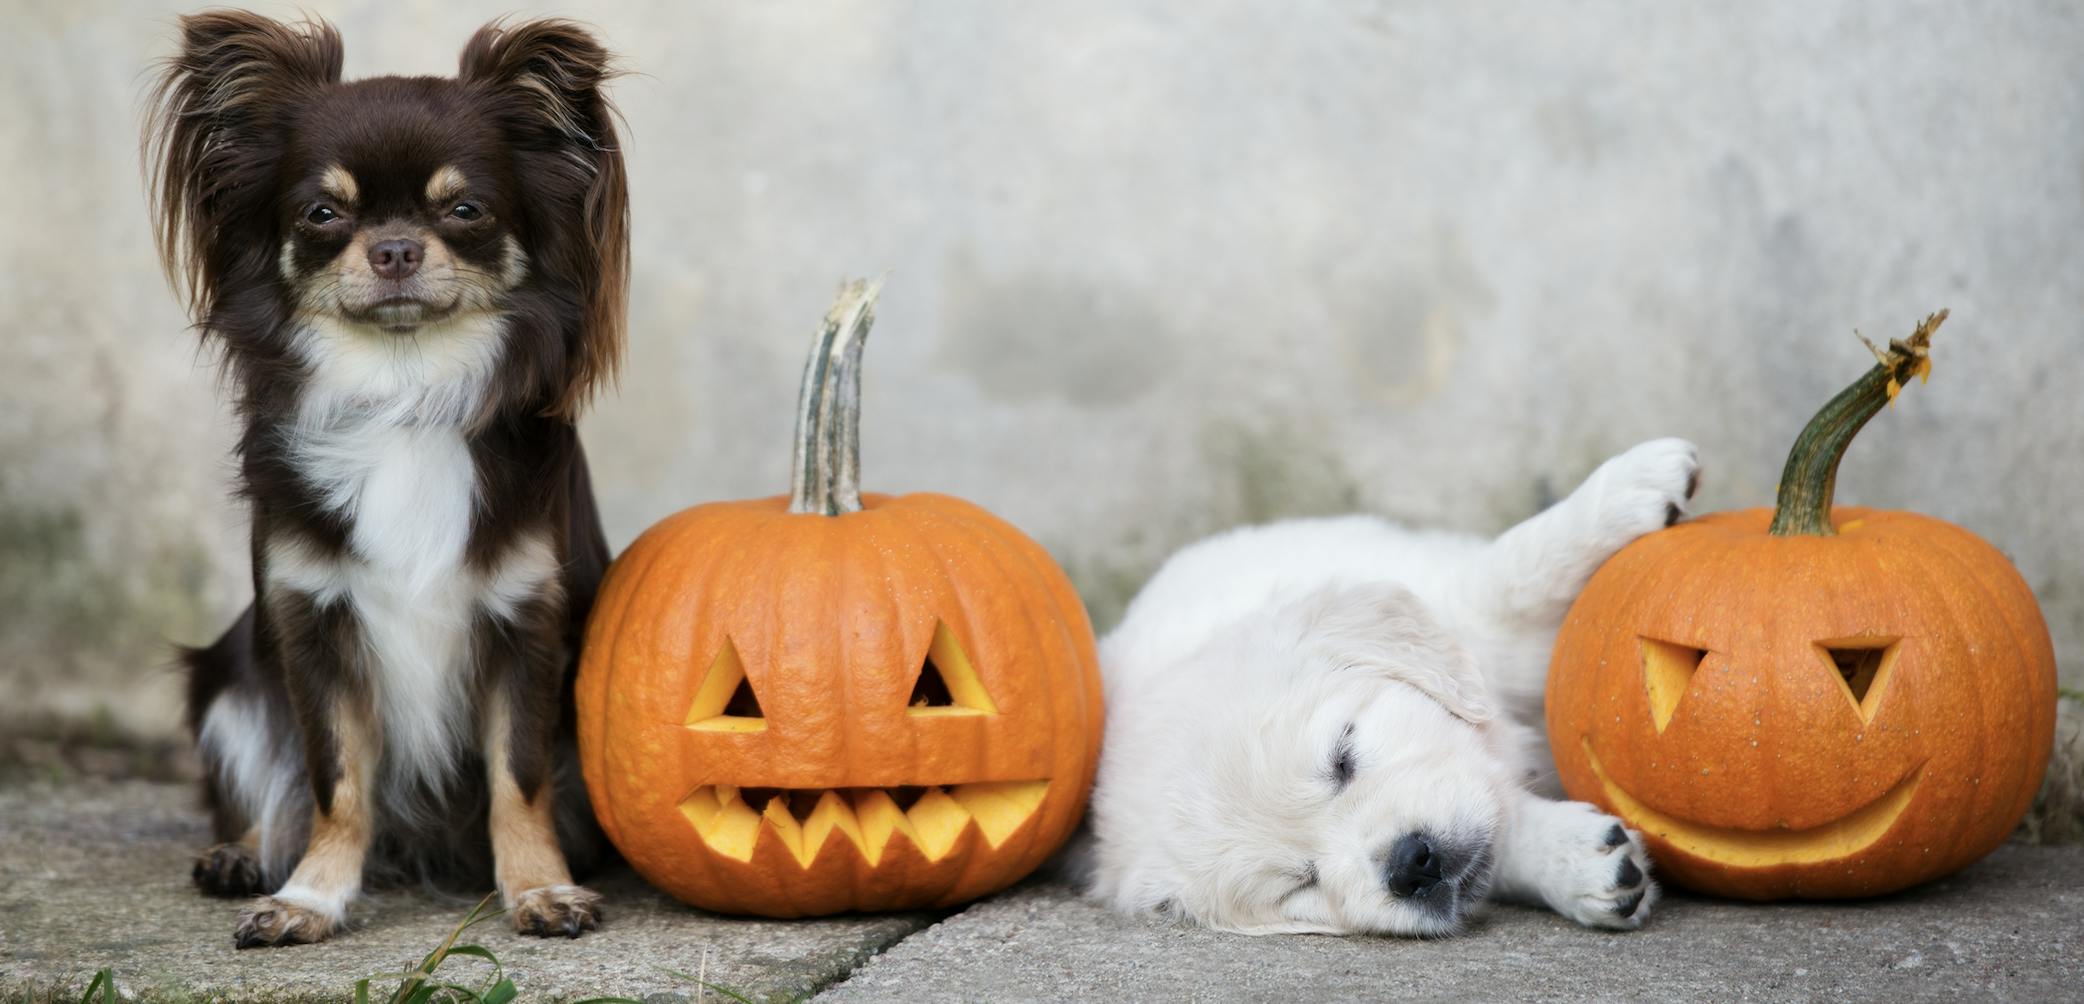 daily-wag-its-halloween-season-13-foods-that-your-pets-can-eat-hero-image